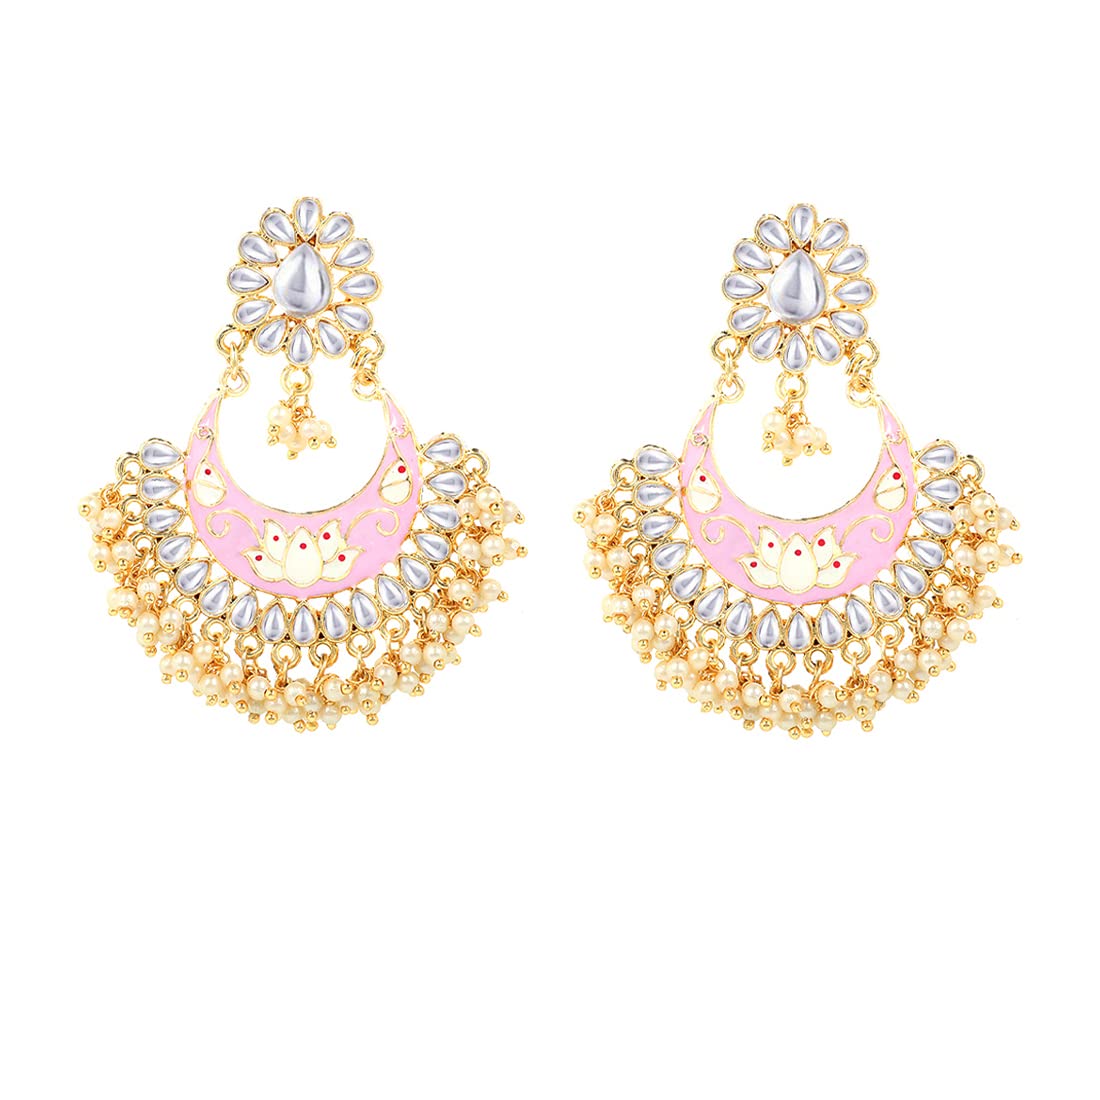 Yellow Chimes Chandbali Earrings for Women Ethnic Gold Plated Traditional Moti Beads Pink Meenakari Chand bali Earrings for Women and Girls